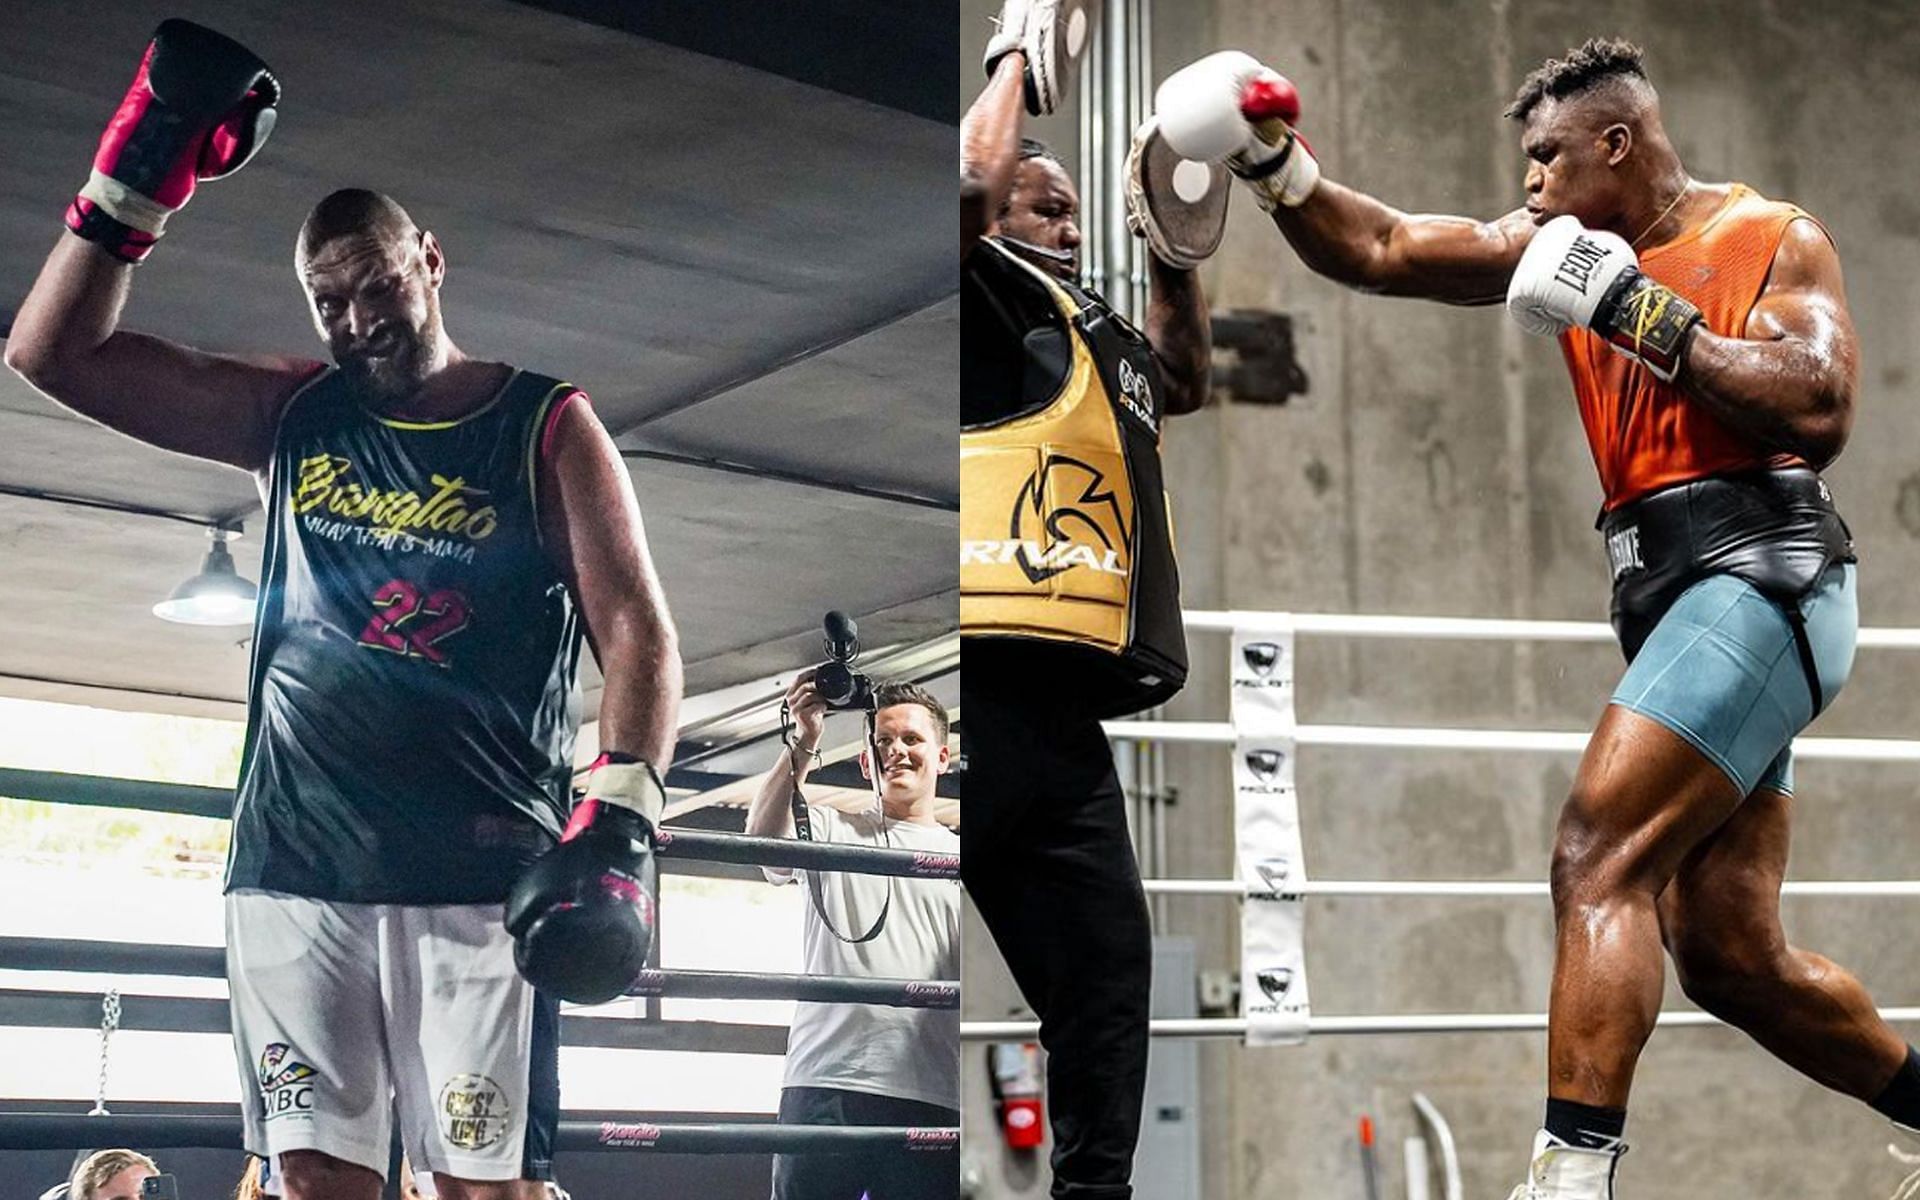 Tyson Fury (left) and Francis Ngannou (right) (Images via @tysonfury and @francisngannou Instagram)